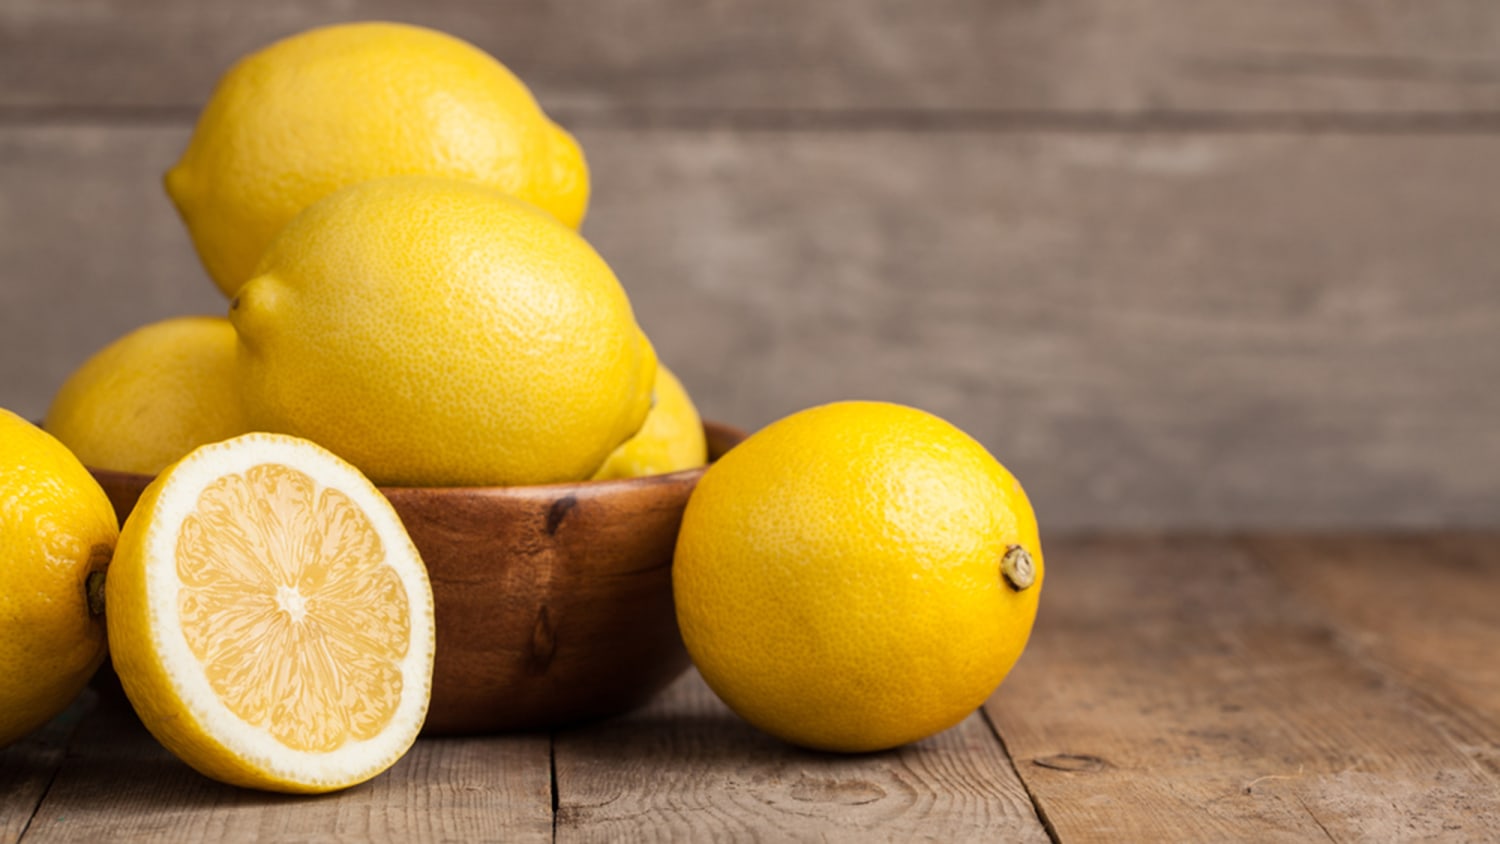 How to use lemons for cleaning - 10 ways to use lemons to clean